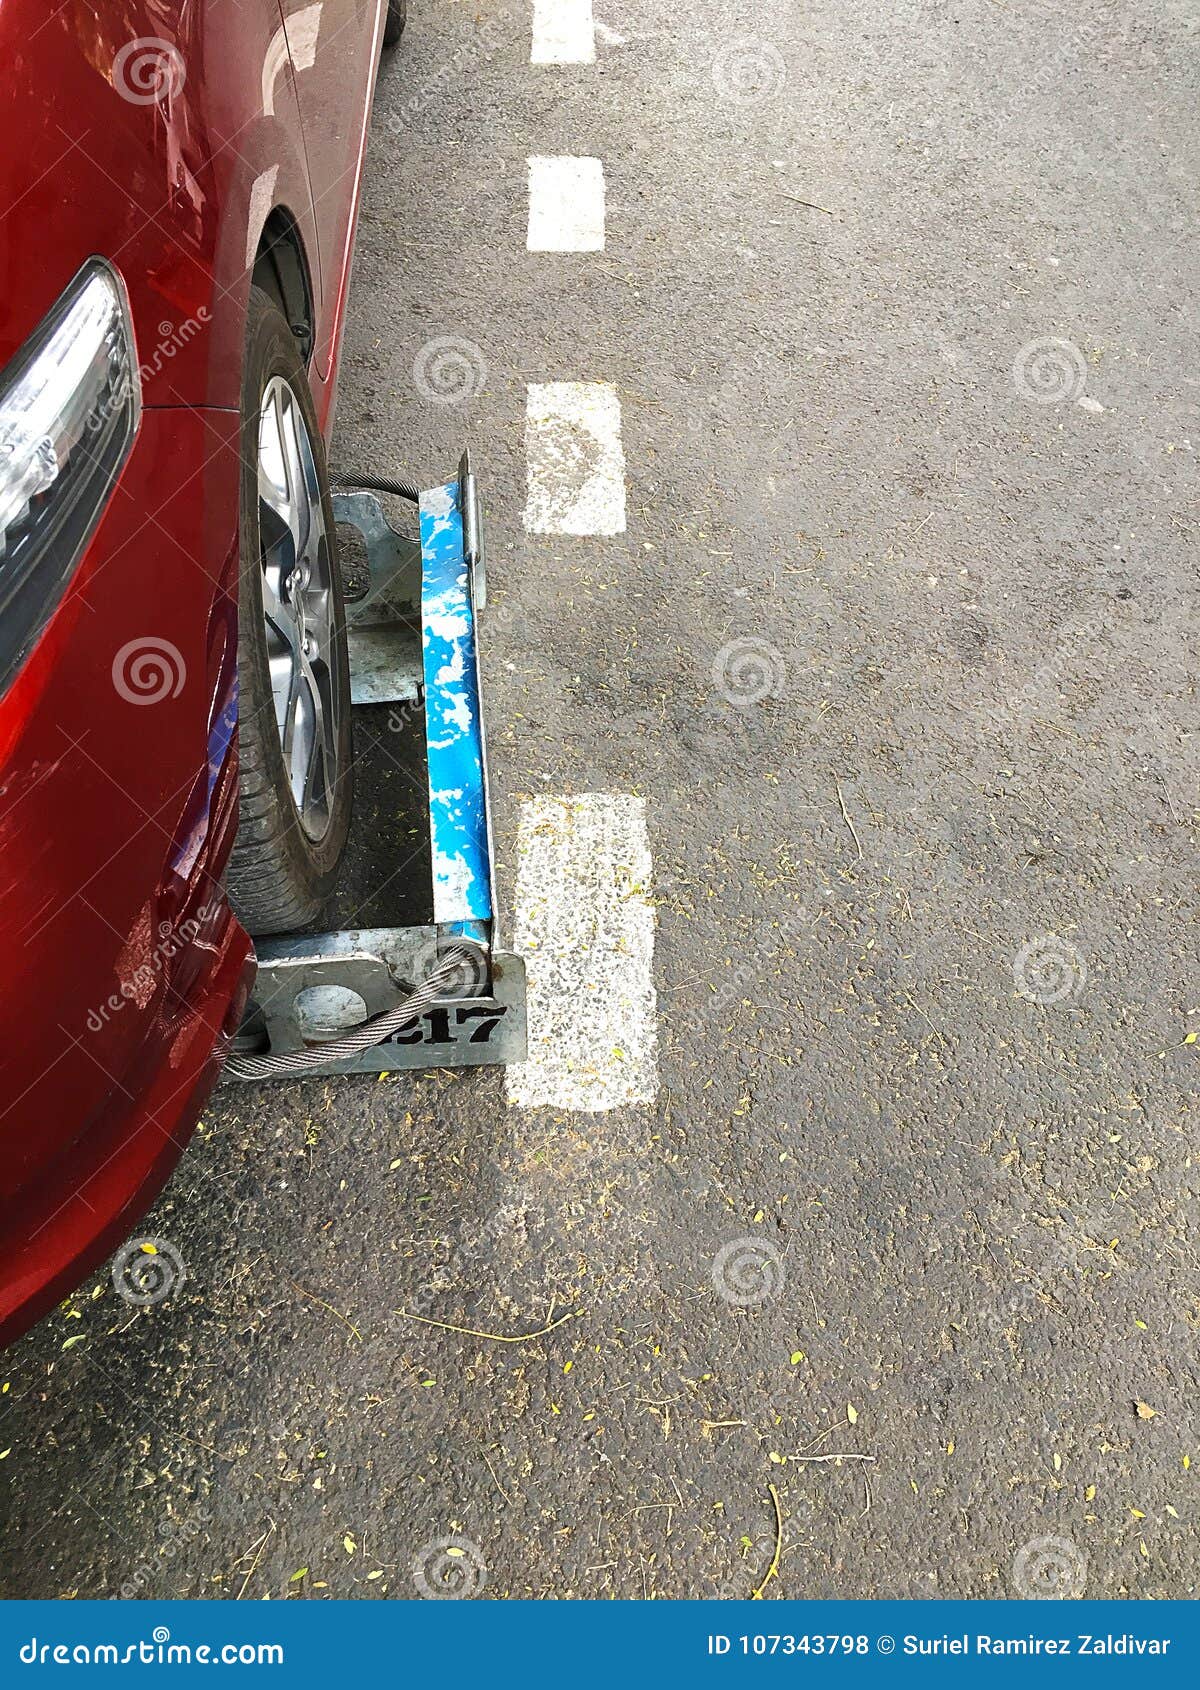 clamped car in the street